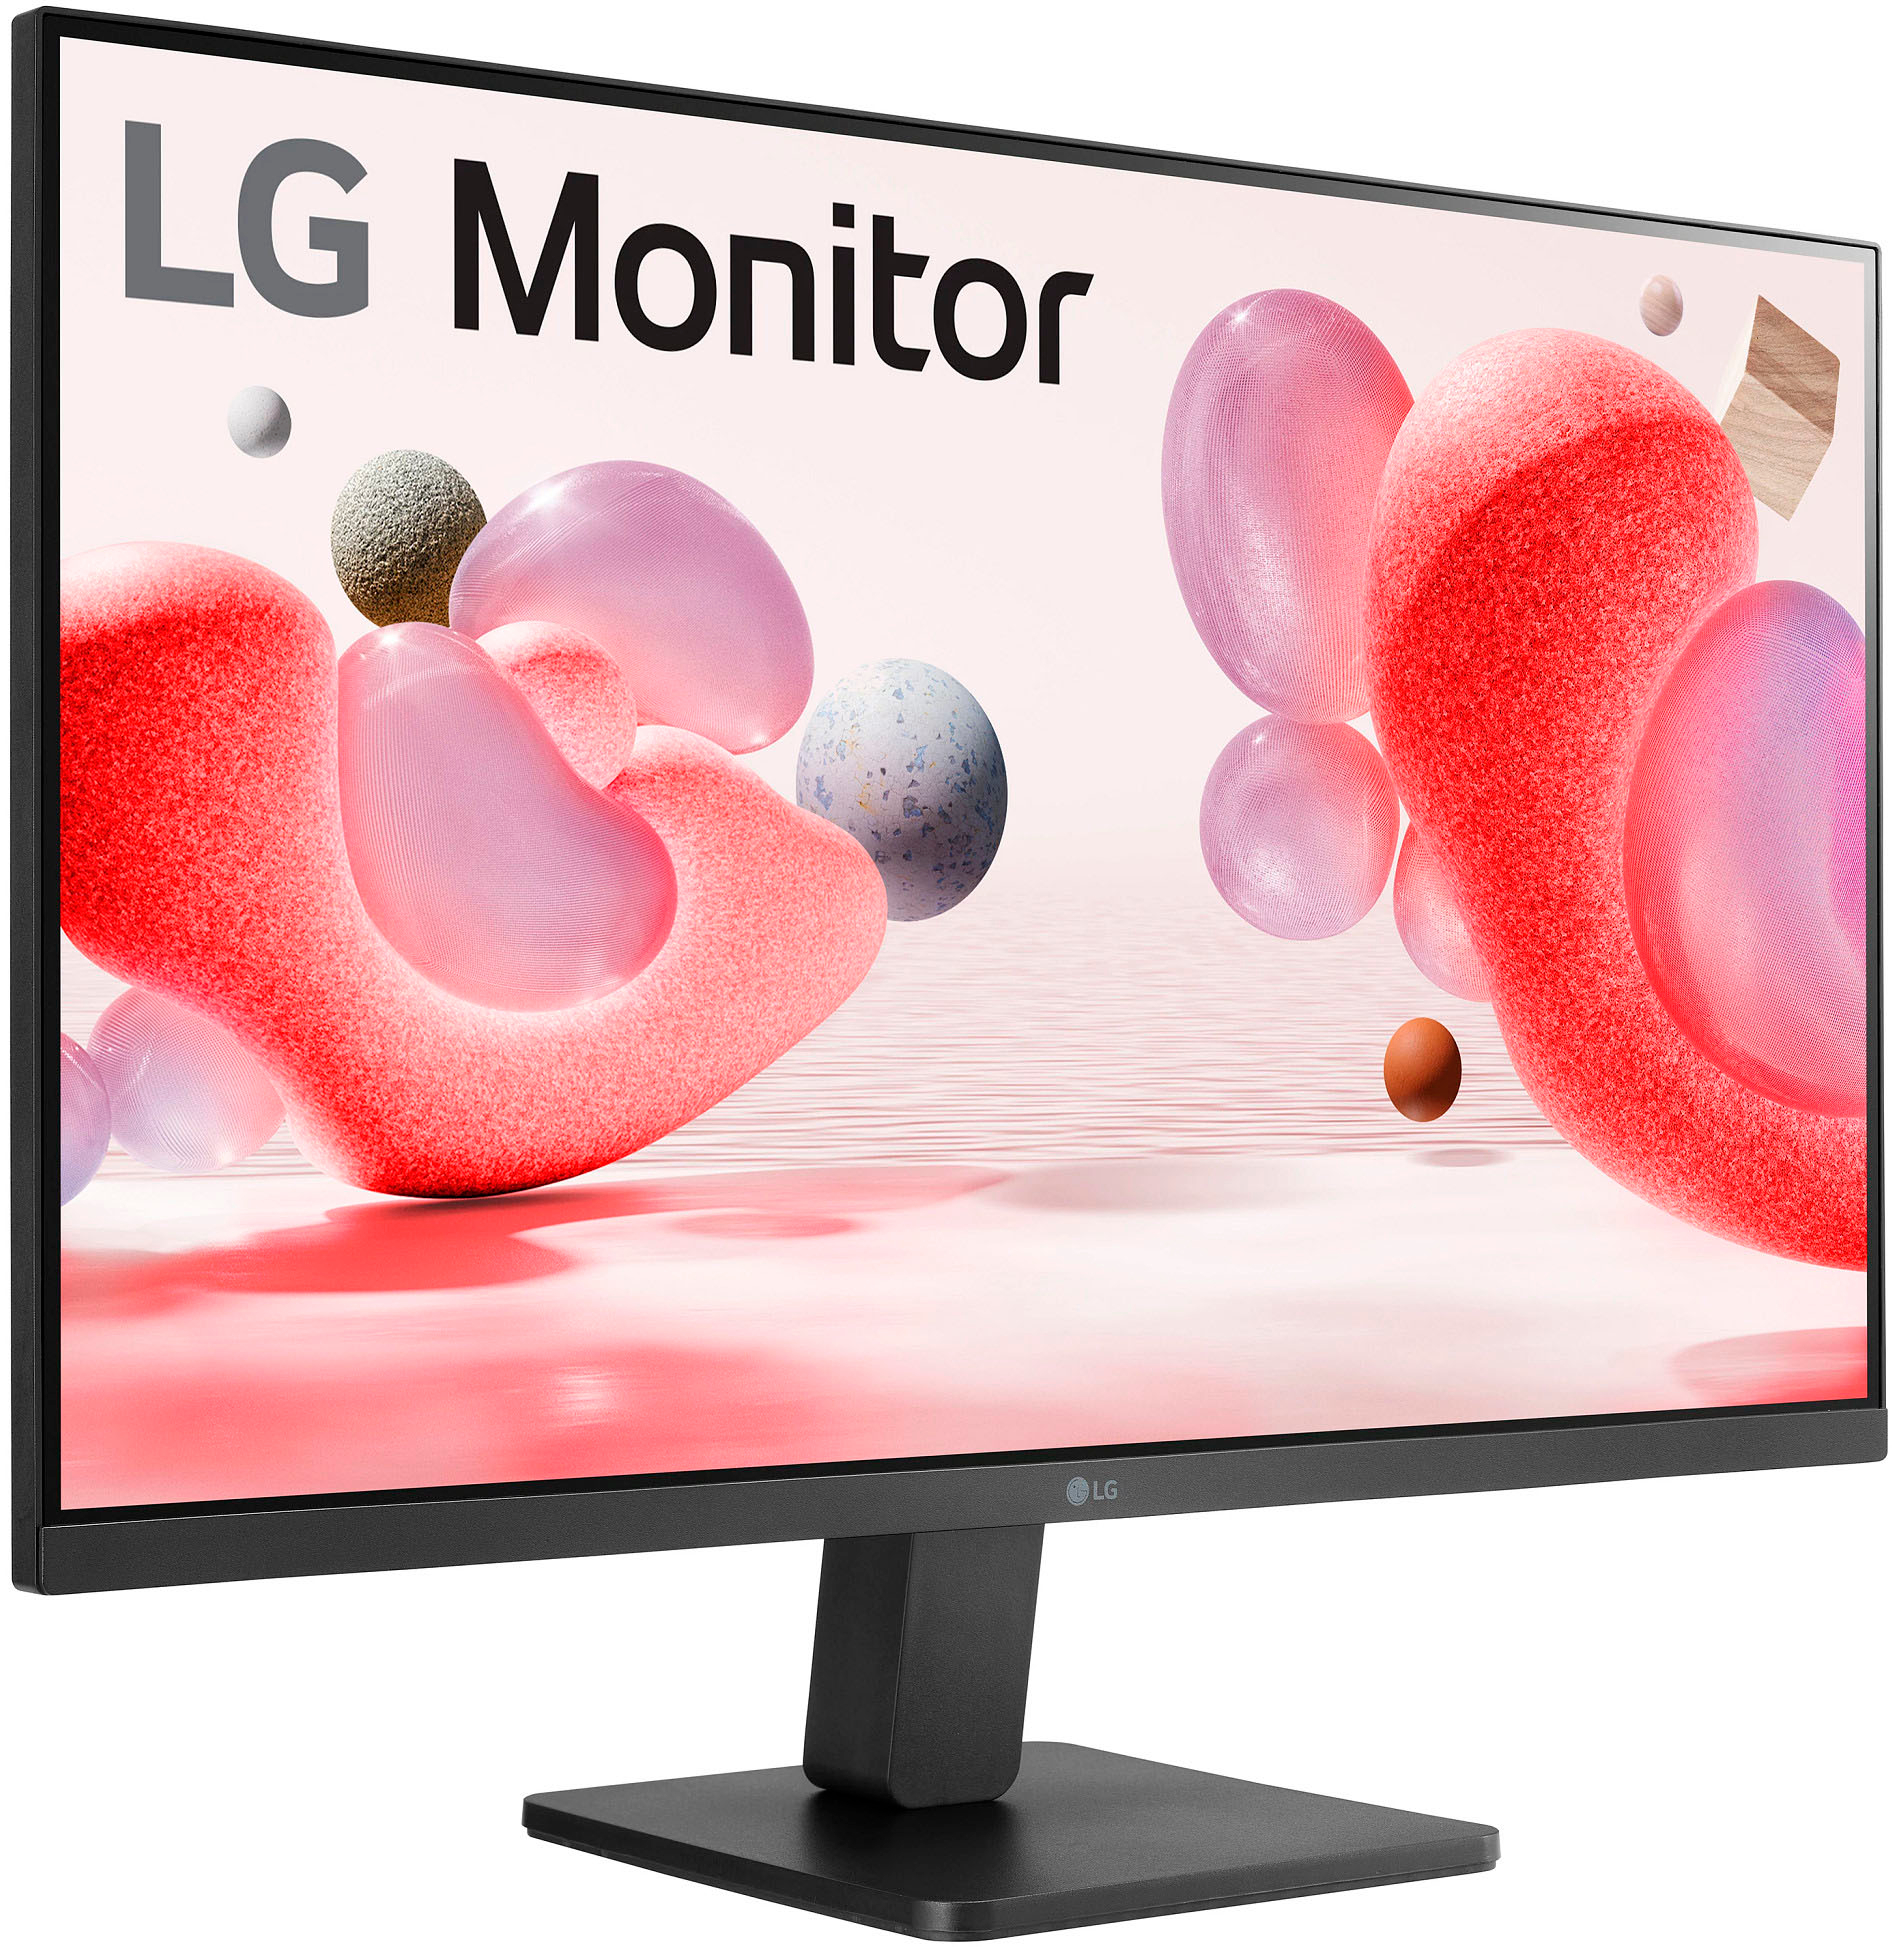  XGaming 27 Inch Monitor 1080P,FHD 100Hz HDR 16:9 Wide IPS  Screen,3ms,98% sRGB,FreeSync,Eye Care Frameless Computer Gaming Monitor  Built-in Speakers,HDMI VGA Display,VESA Mounted,Tilt Adjustable :  Electronics